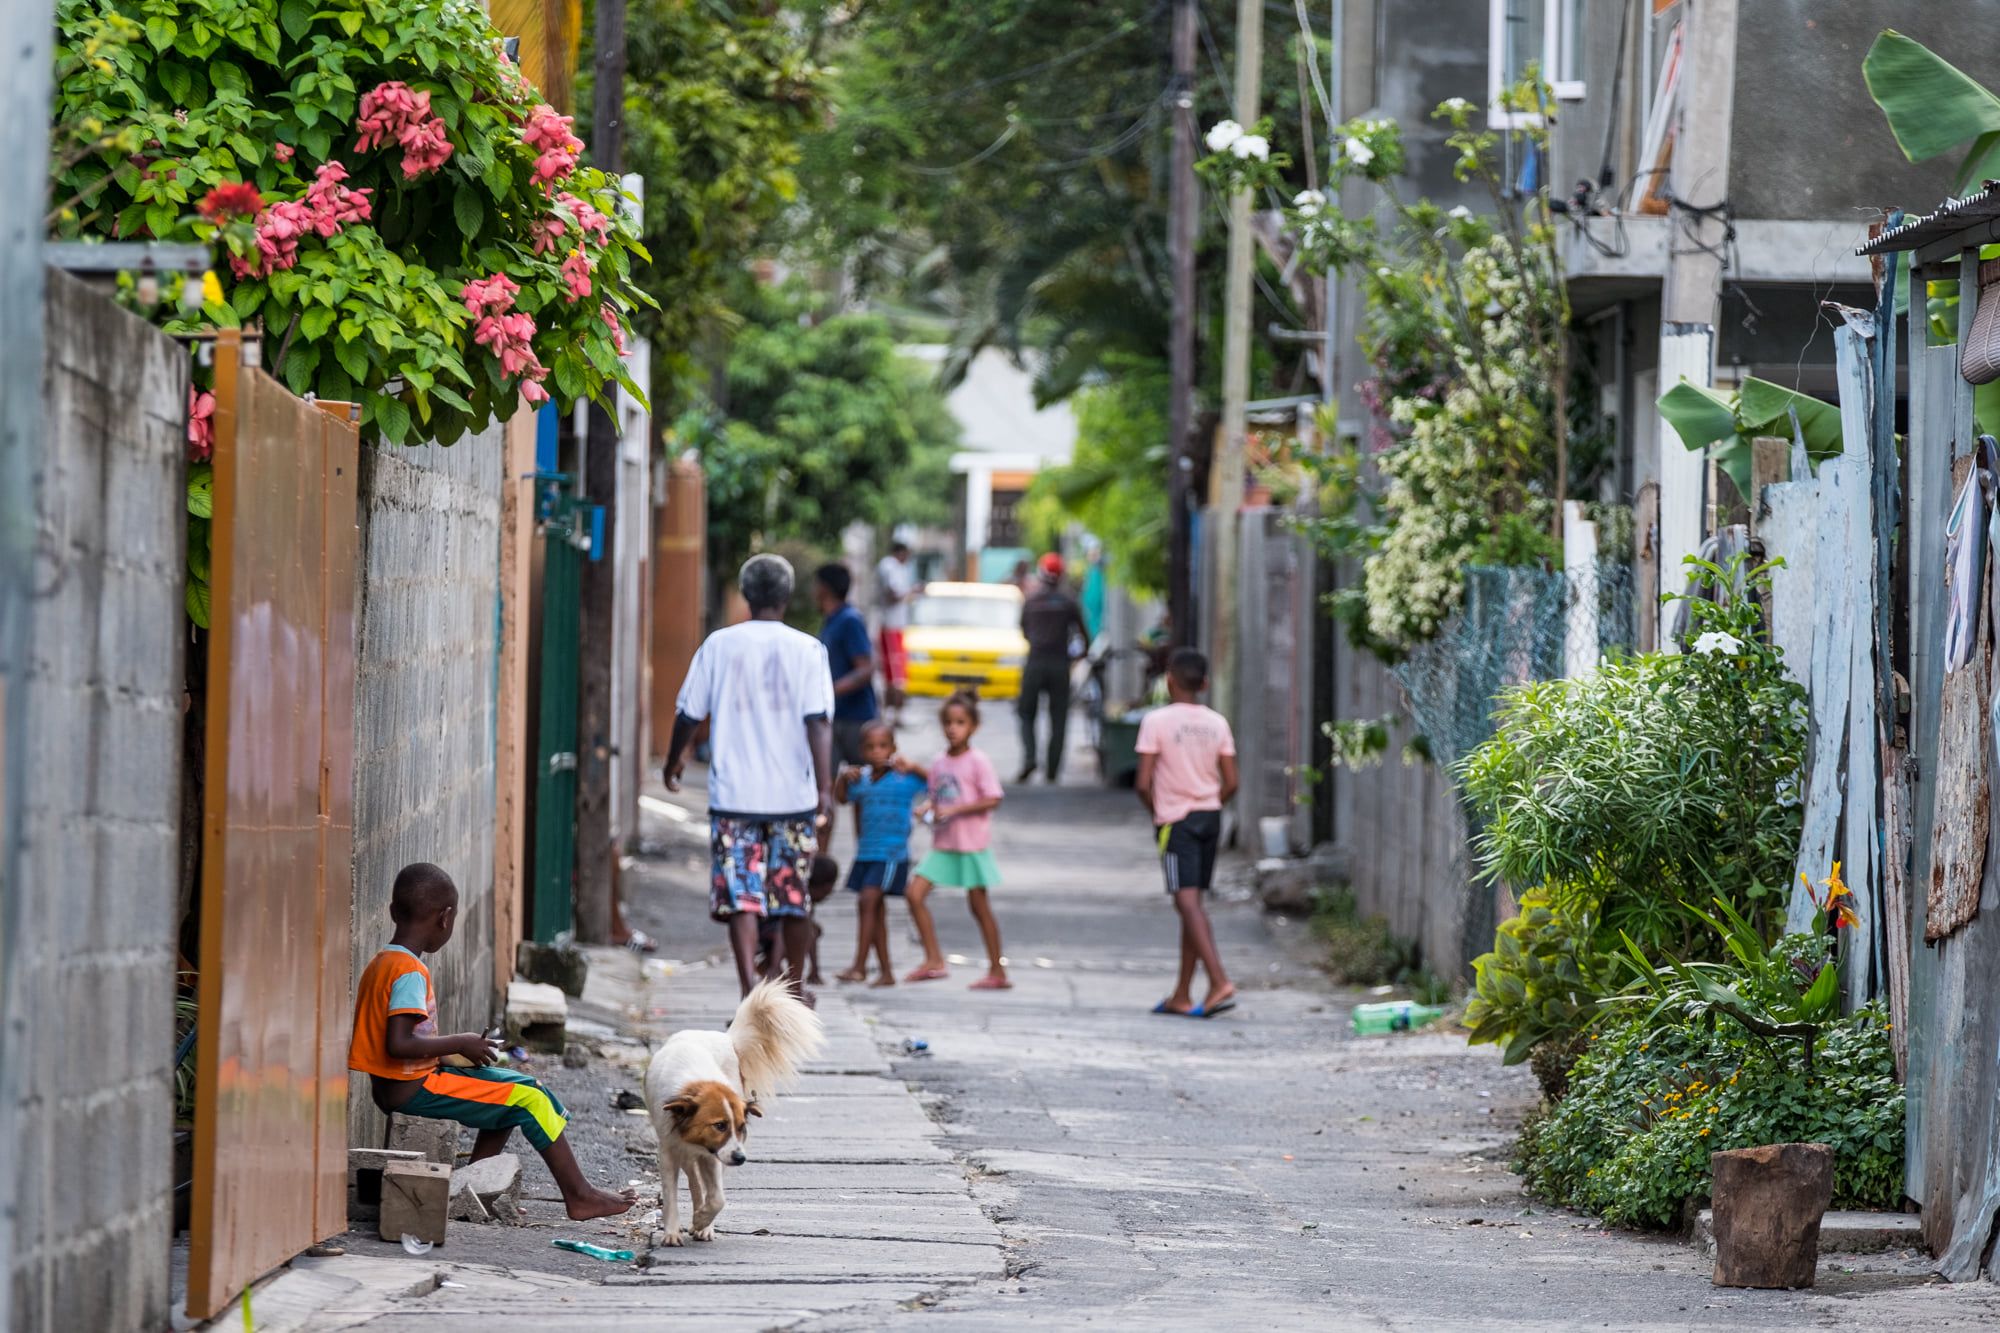 Children and a dog on a street in Mauritius. Photo: Mauritius Conscious.